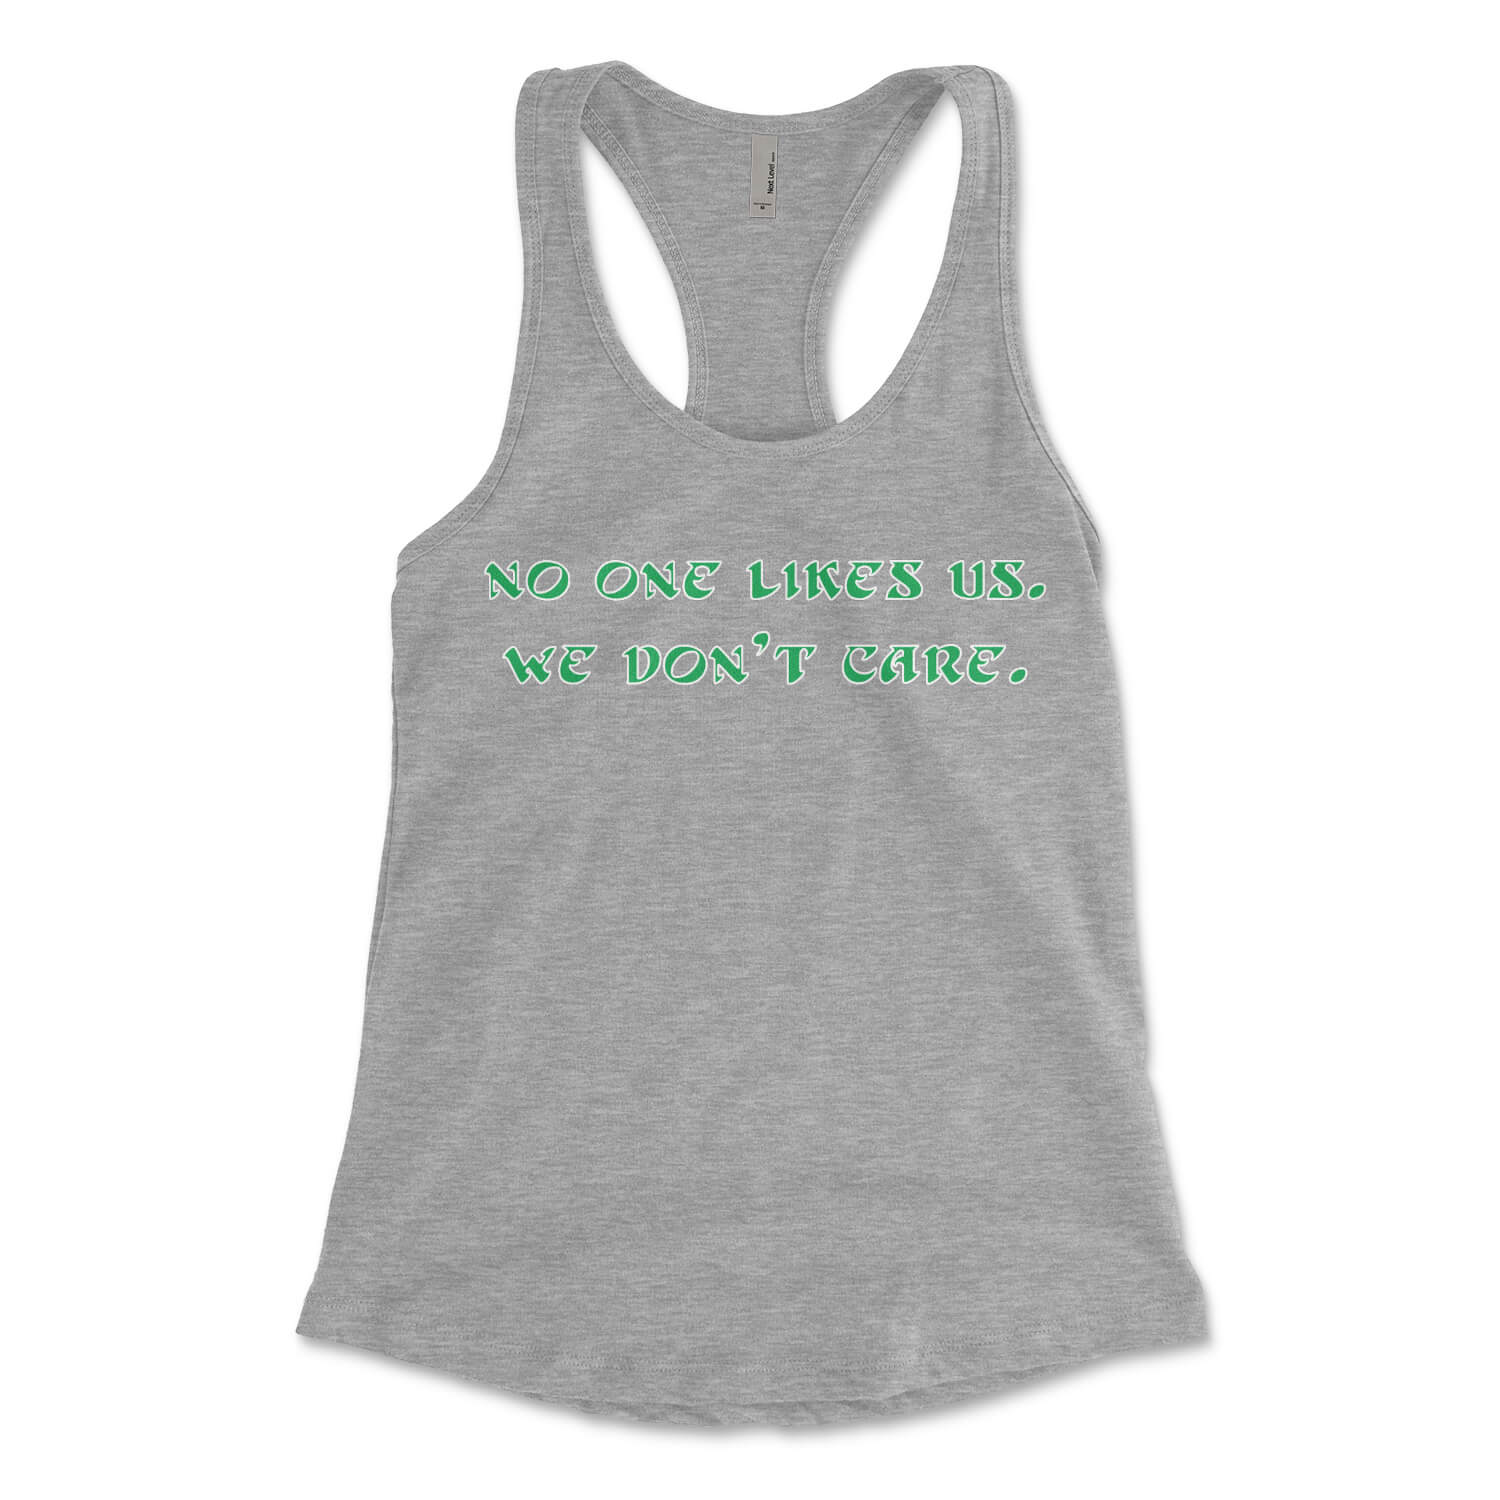 Philadelphia Eagles no one likes us we don't care heather grey womens racerback tank top from Phillygoat